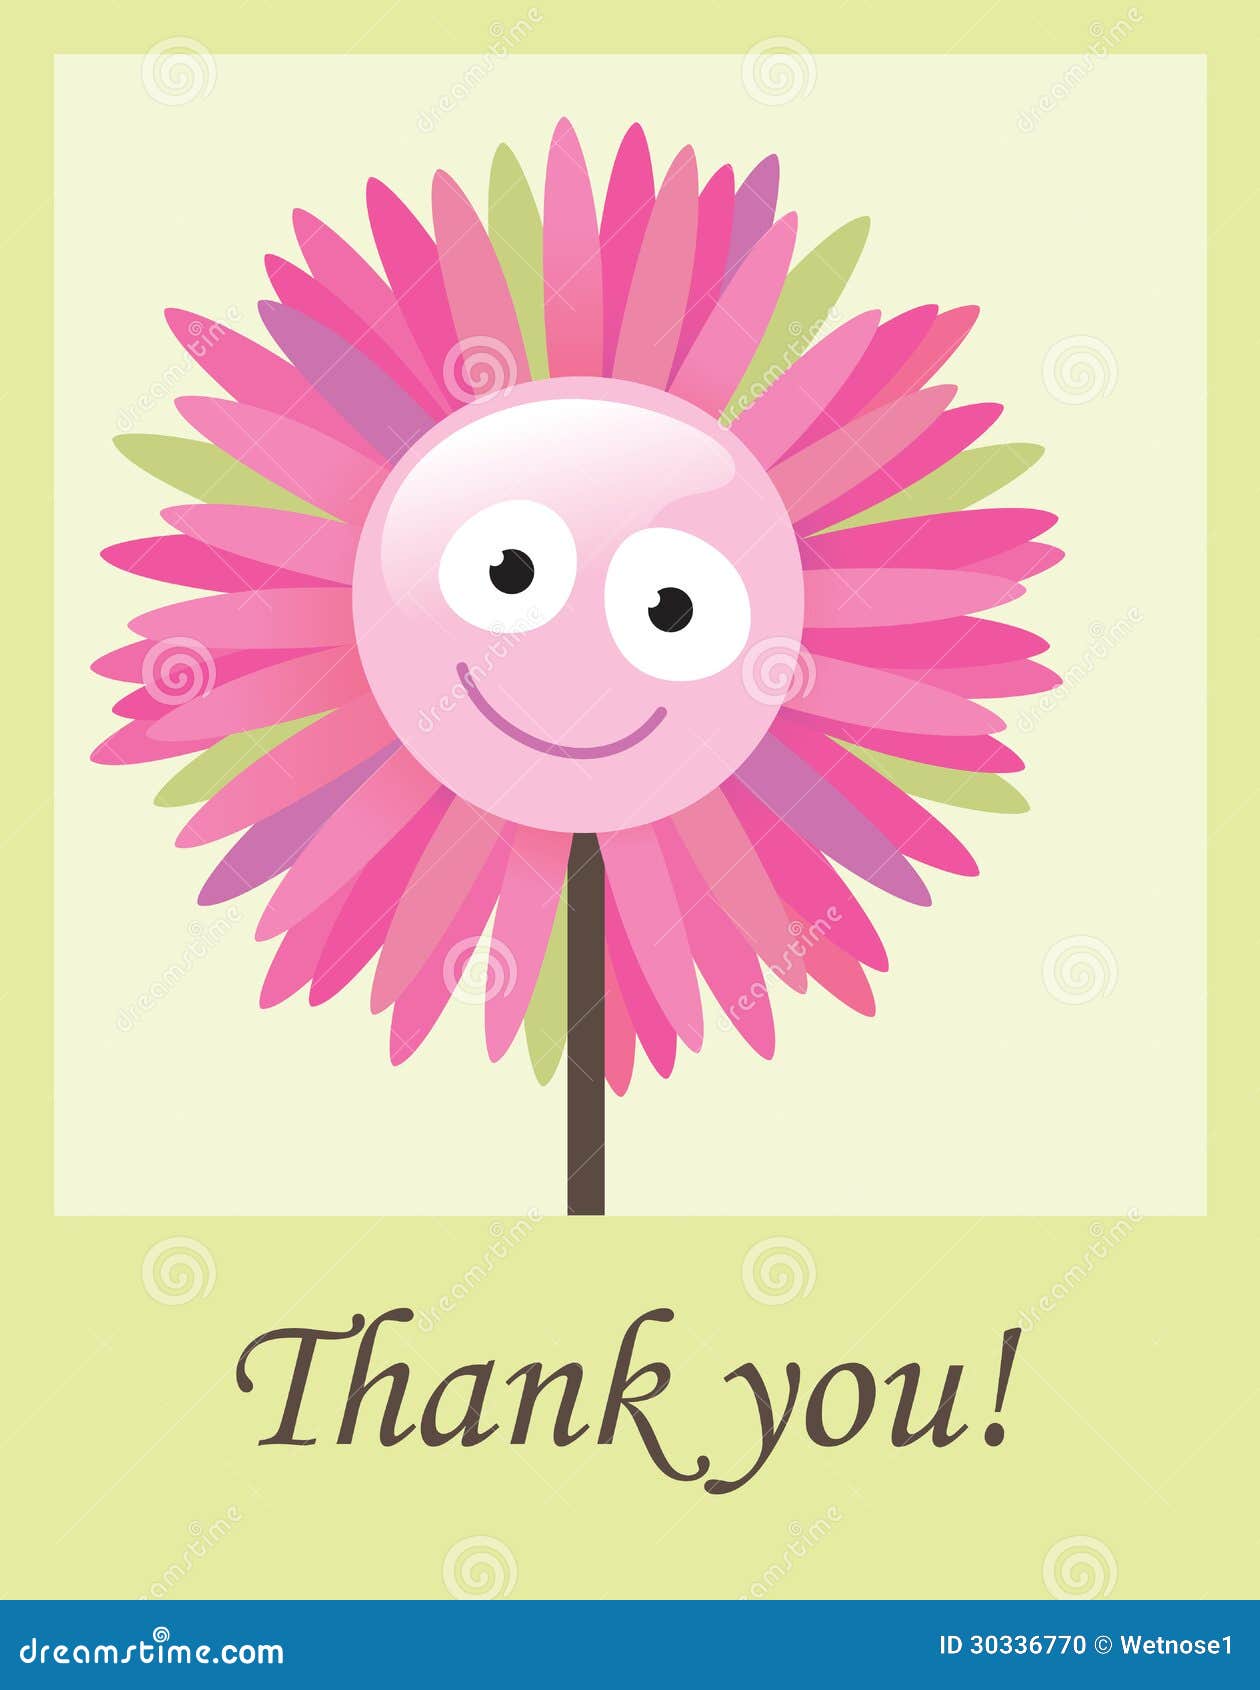 clip art for thank you with flowers - photo #30